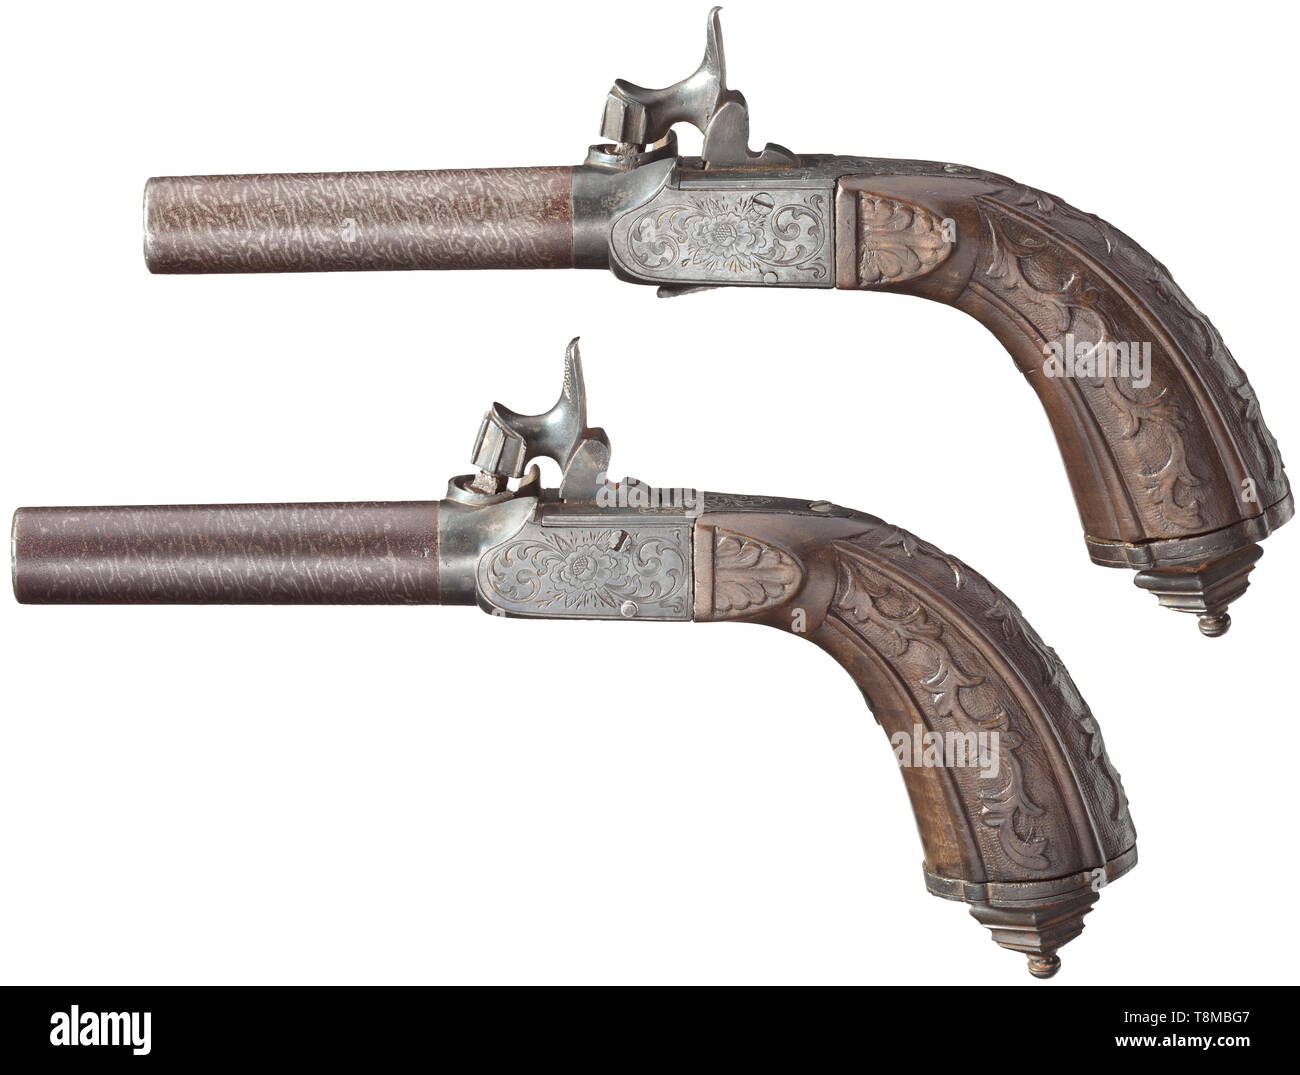 A pair of French pocket pistols, circa 1850 Unscrewable, rifled Damascus barrels in 10.5 mm calibre. Percussion locks with engraved and burnished, somewhat pitted lock housings. Carved grips with chiselled pommels. Length 19 cm. historic, historical, civil handgun, civil handguns, handheld, gun, guns, firearm, fire arm, firearms, fire arms, weapons, arms, weapon, arm, 19th century, Additional-Rights-Clearance-Info-Not-Available Stock Photo